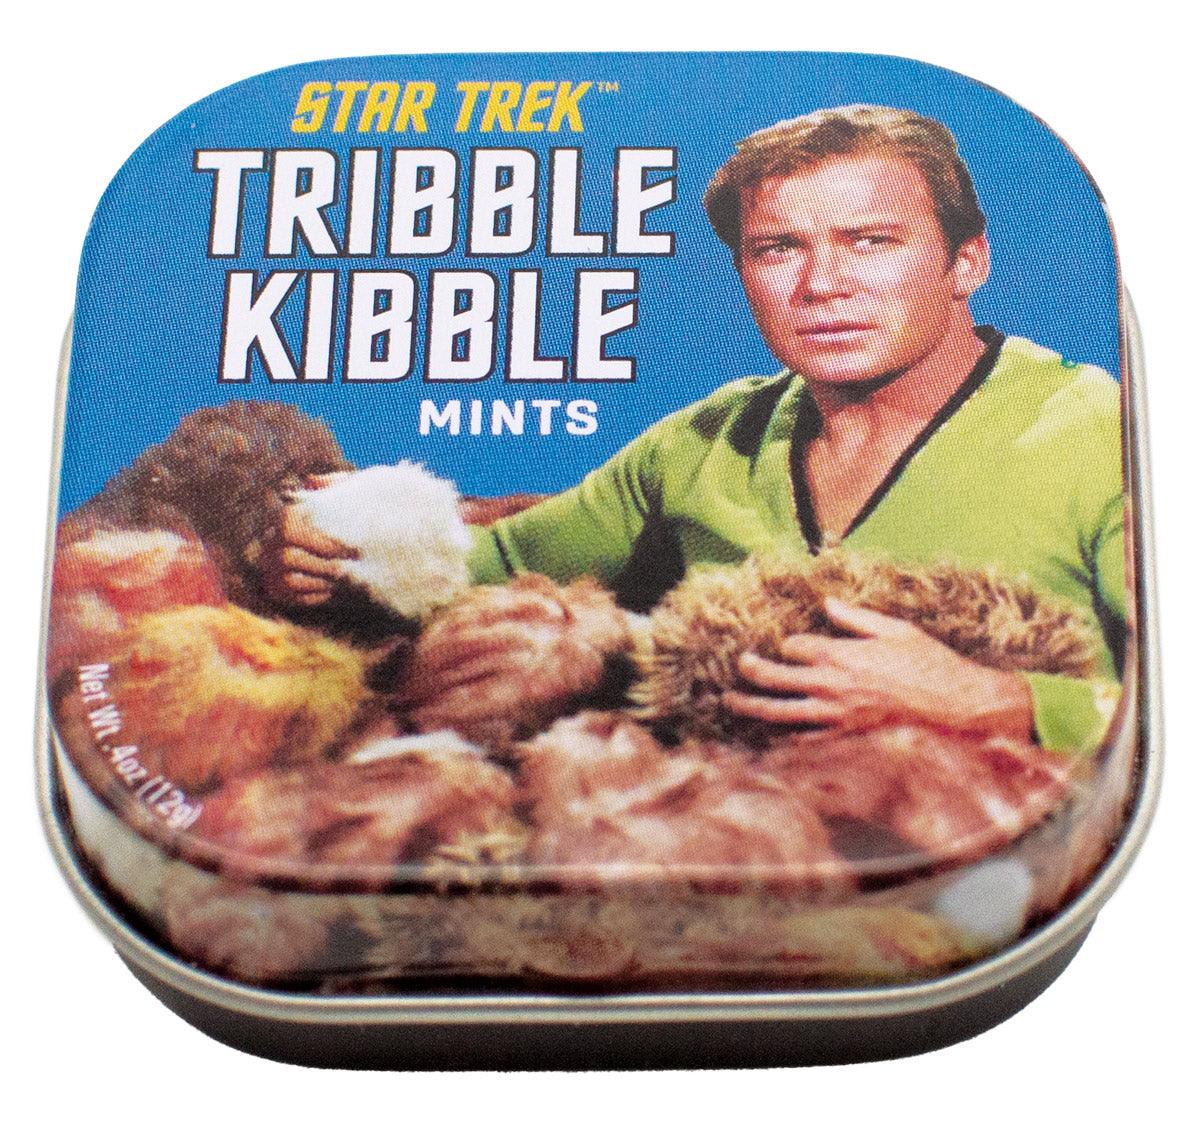 Product photo of Star Trek Tribble Kibble Mints, a novelty gift manufactured by The Unemployed Philosophers Guild.